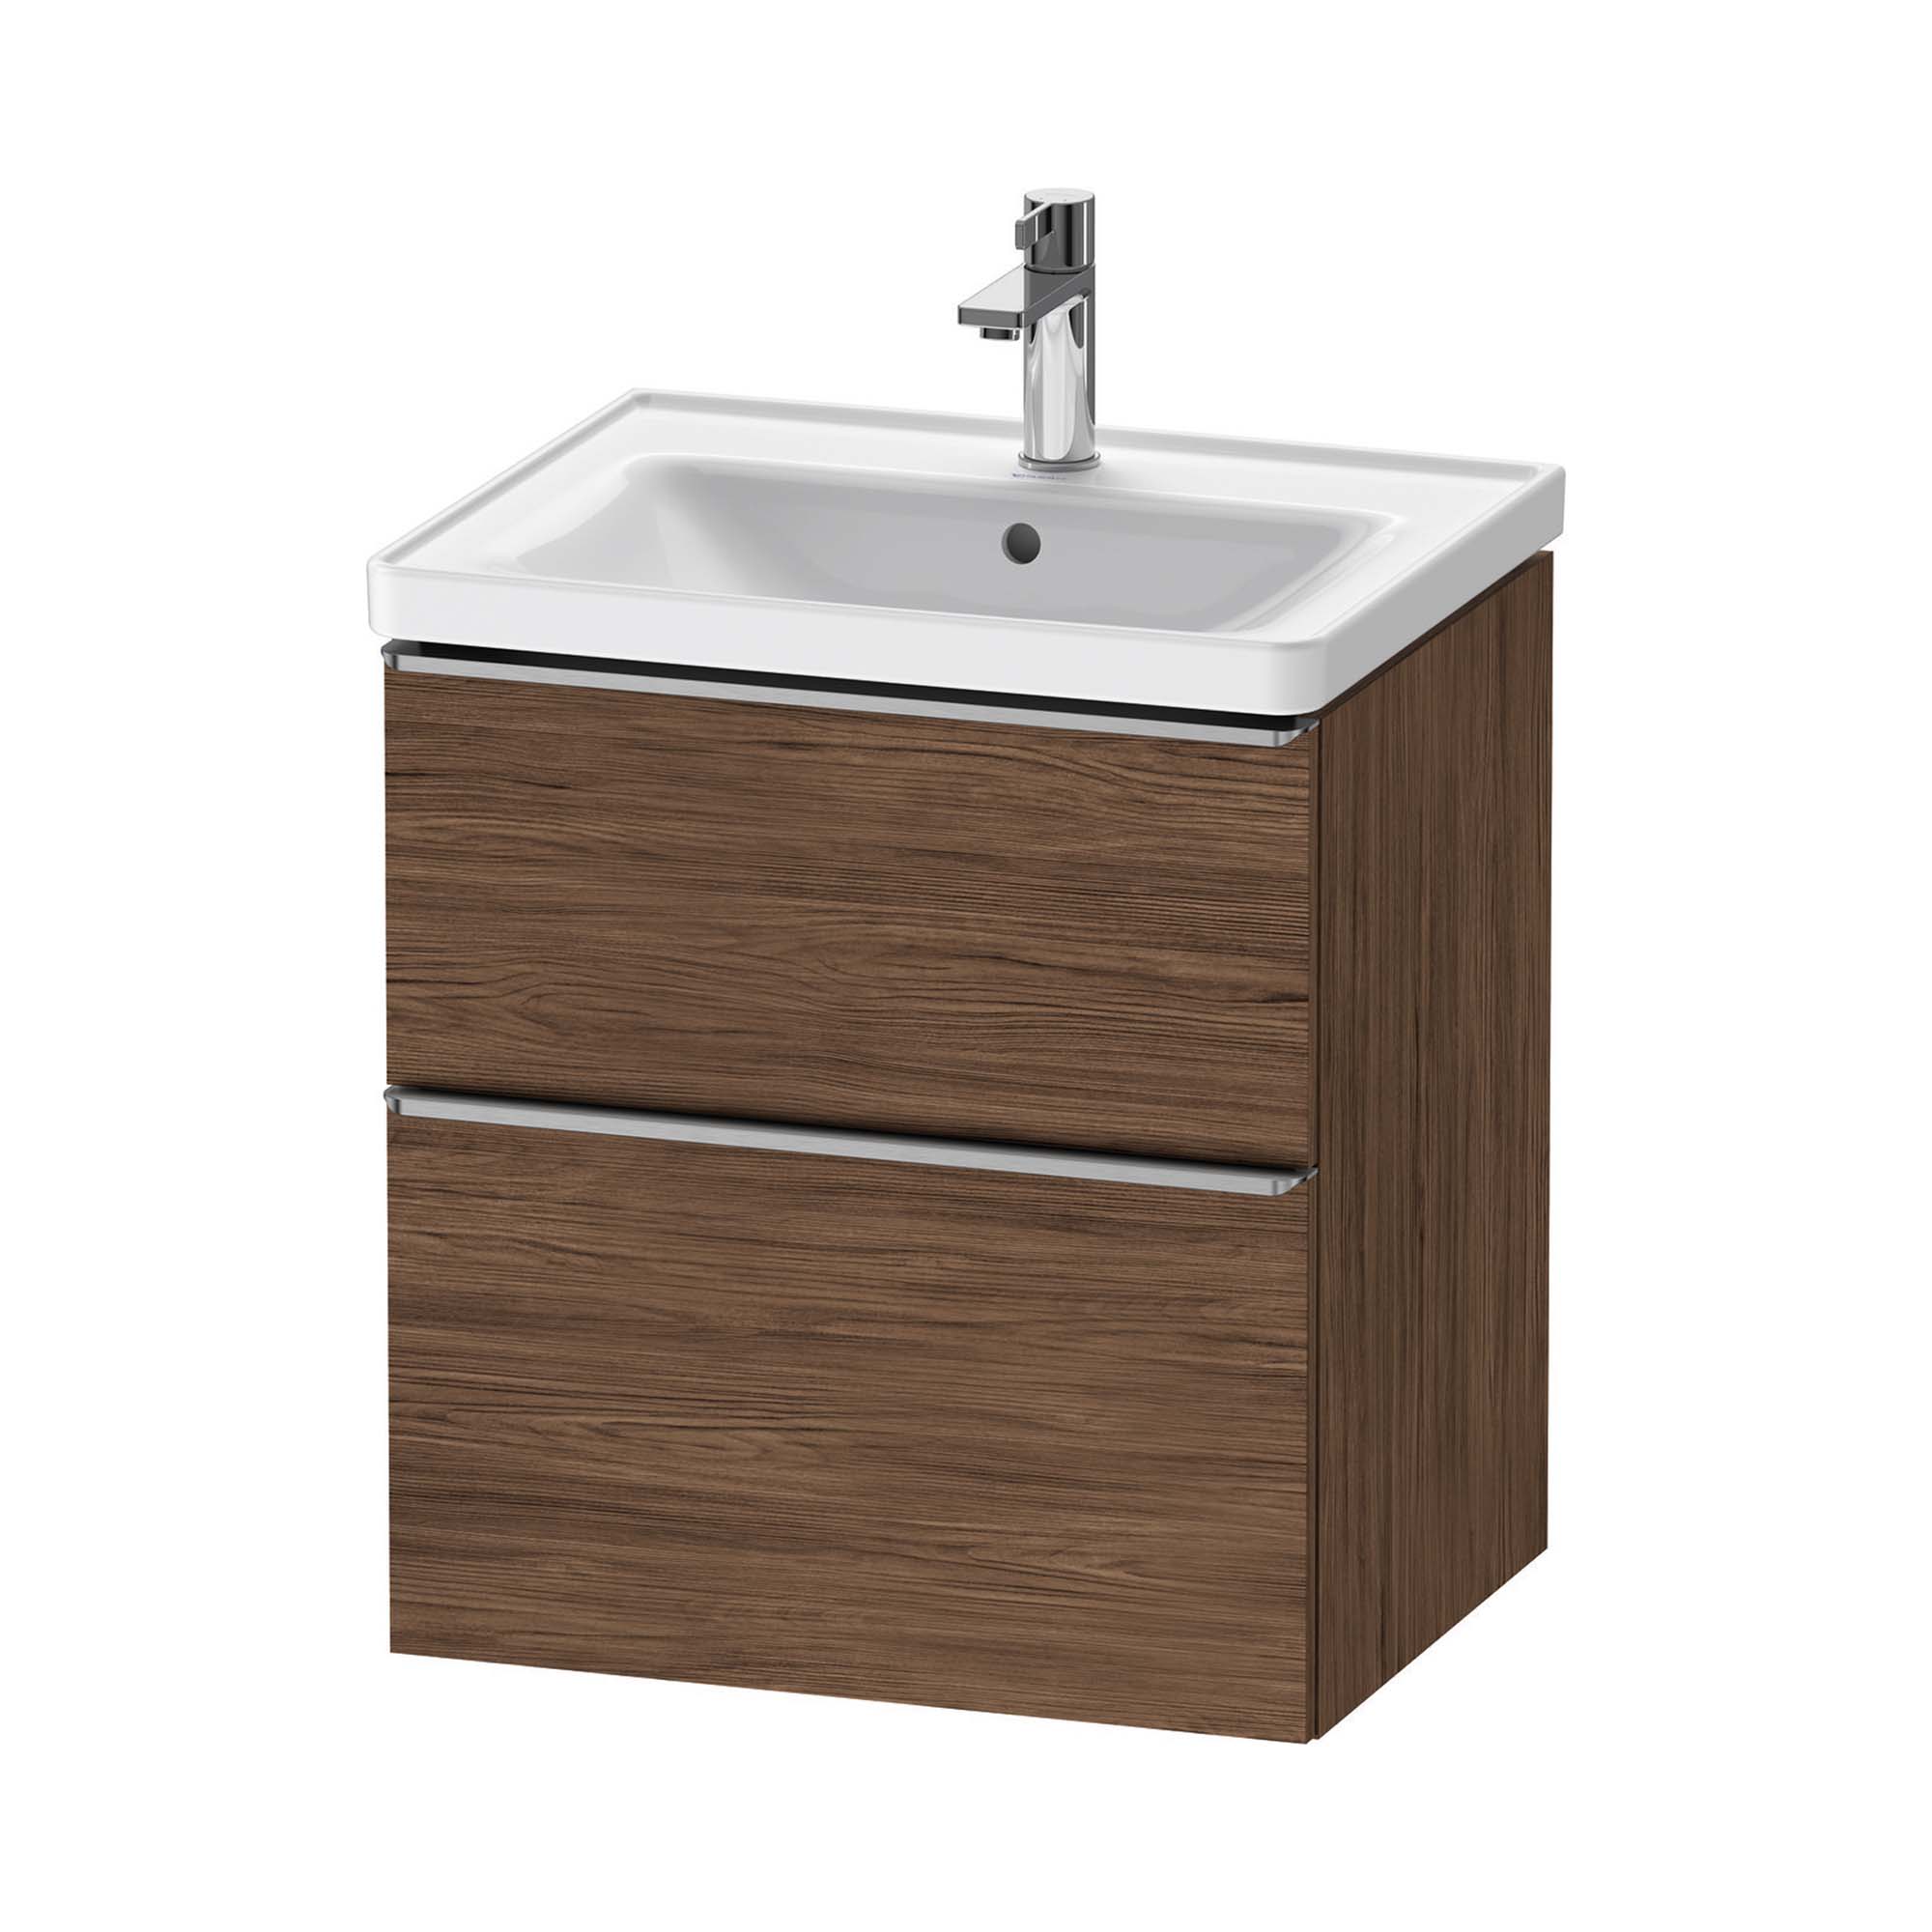 duravit d-neo 600 wall mounted vanity unit with d-neo basin dark walnut stainless steel handles